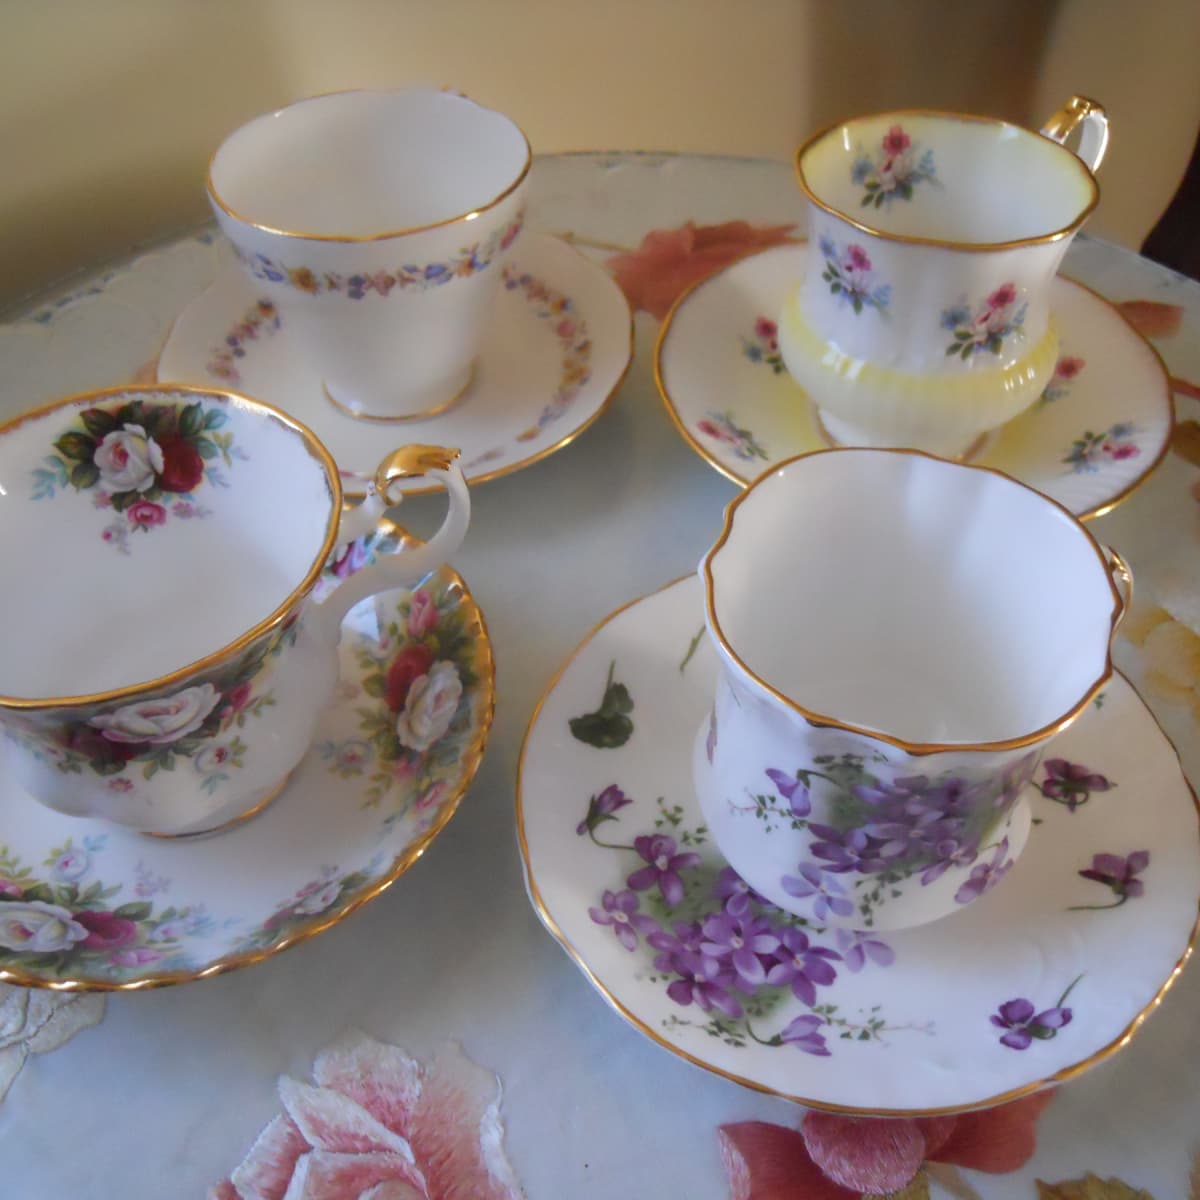 Paragon Cup Saucer Floral Teacup Purple Blue Flowers England Vintage Footed Cup Tea Party Bridal Shower Afternoon Tea Mad Hatters Party